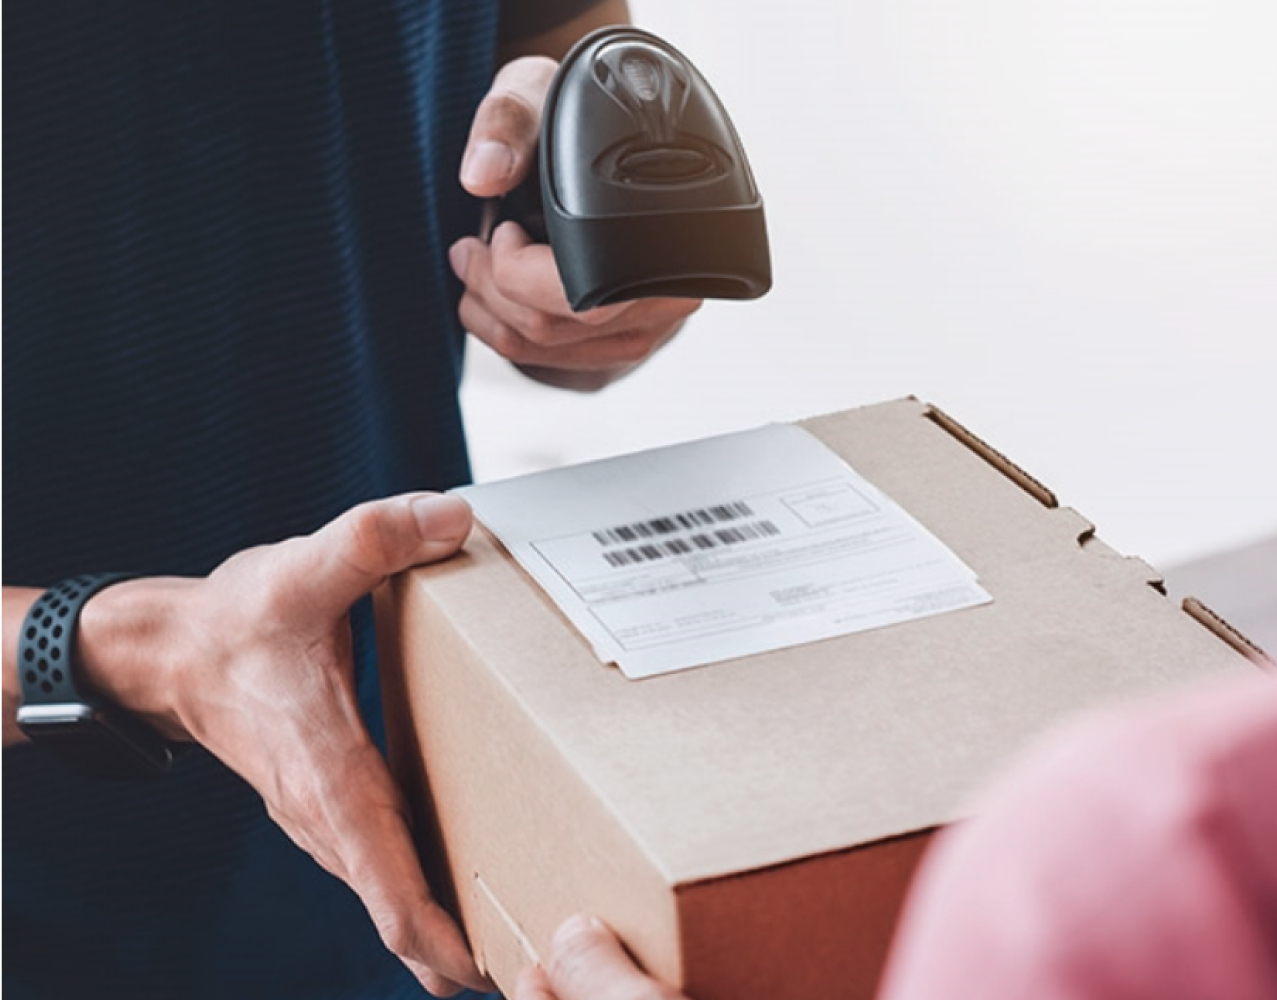 Delivery driver scanning package